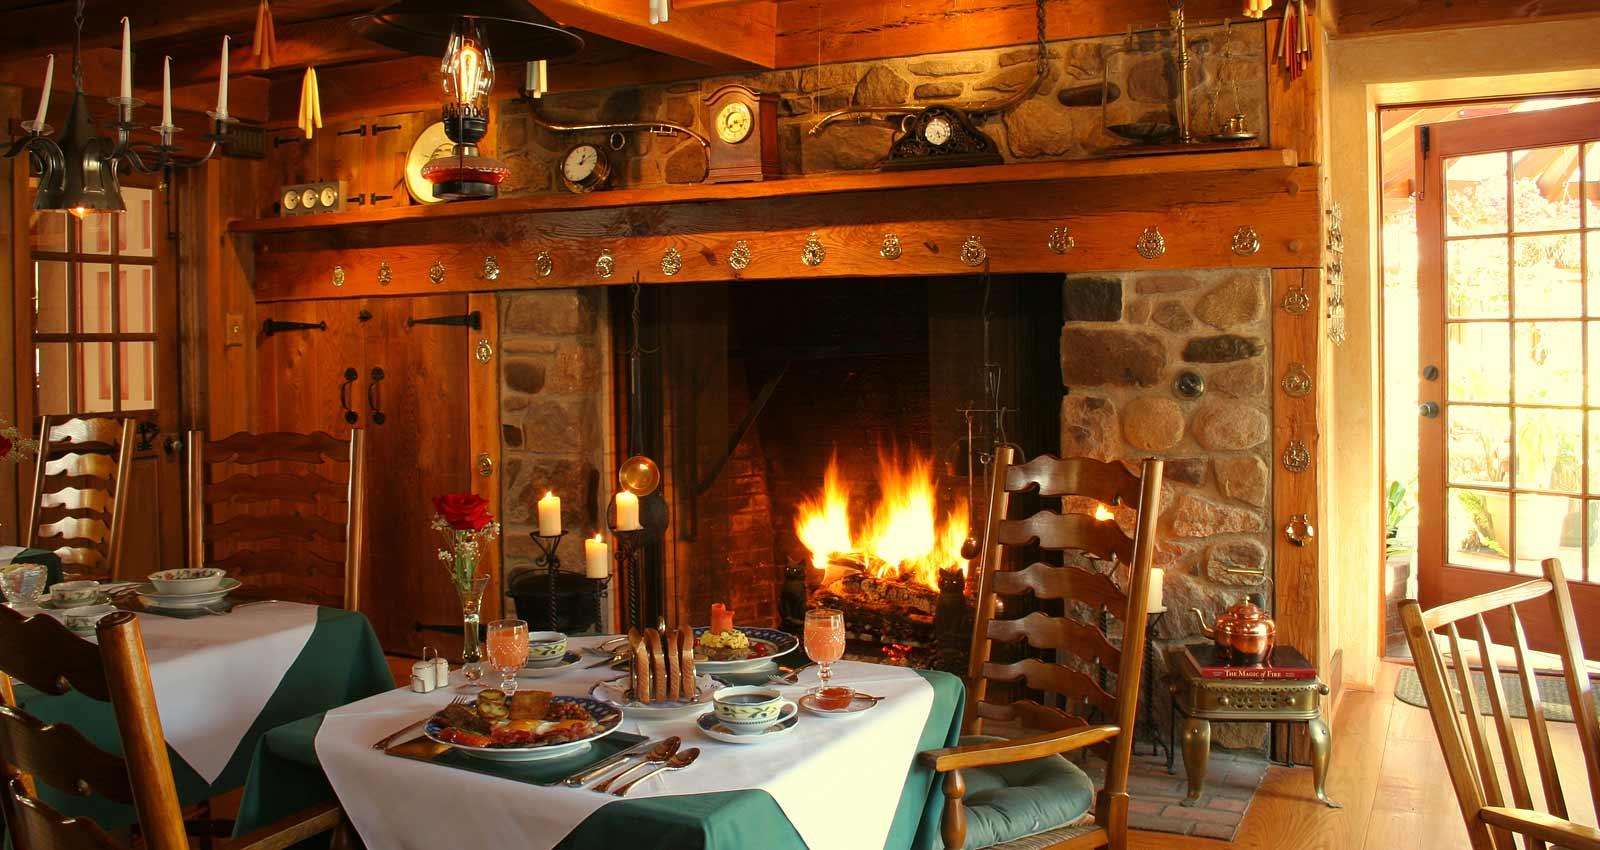 Breakfast Next to the Fireplace